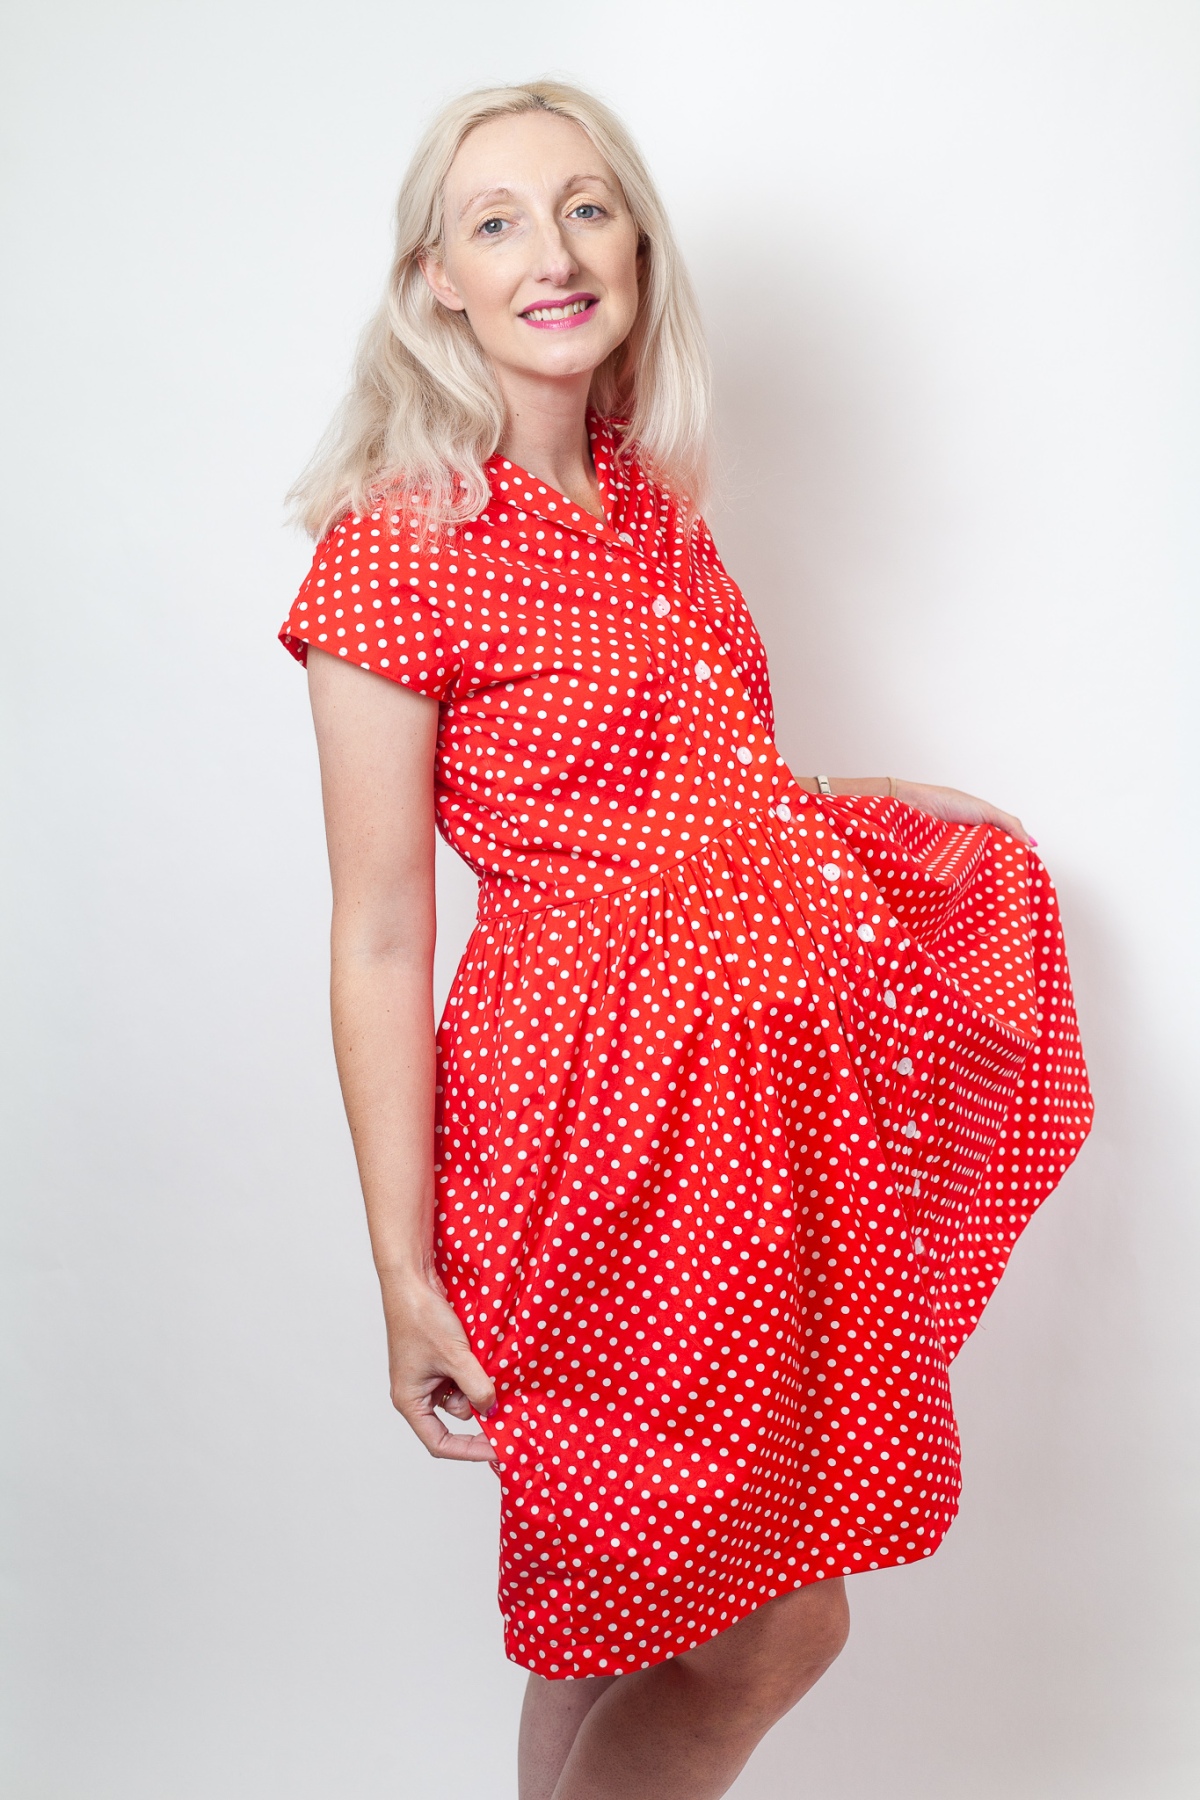 New Sew Over It – Penny Dress hack